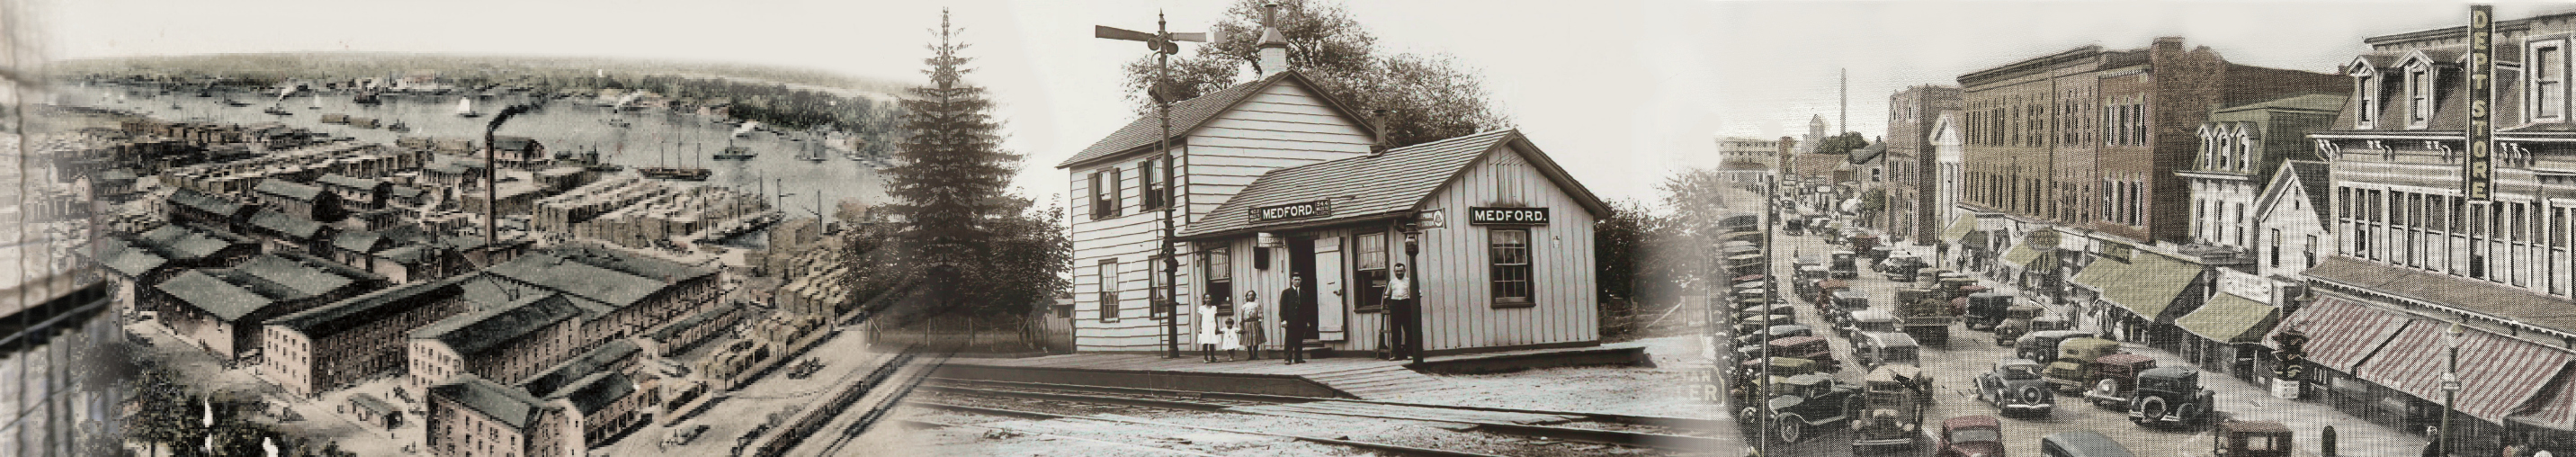 Patchogue-Medford Area History Header